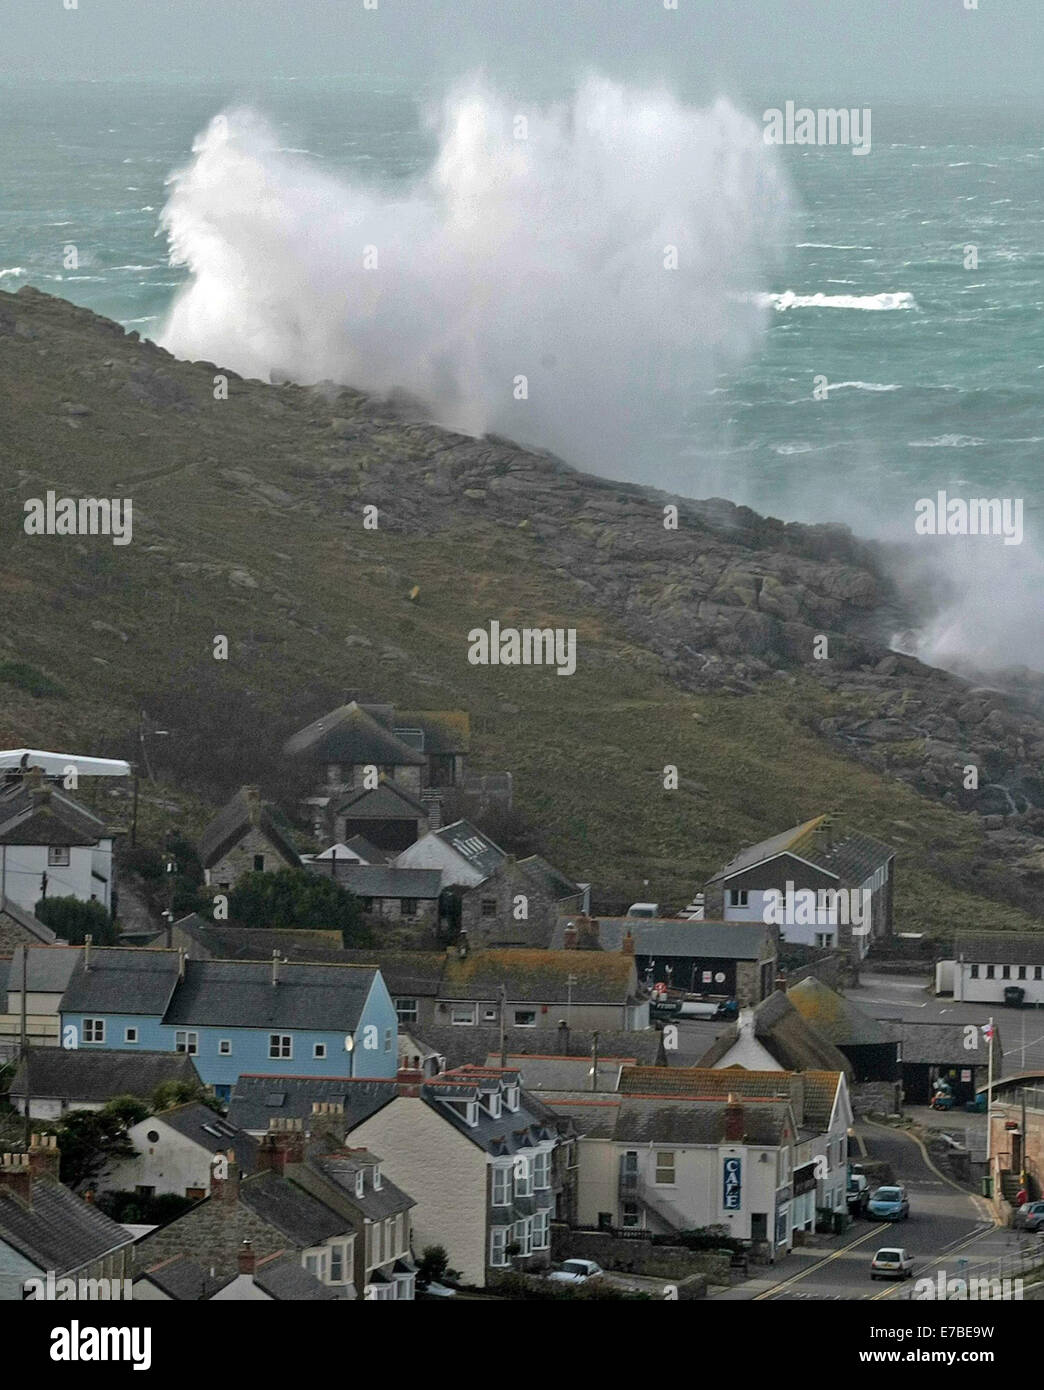 Waves crash into the seafront at Sennen Cove in Cornwall, as storms continue to batter the South West of England. Stock Photo